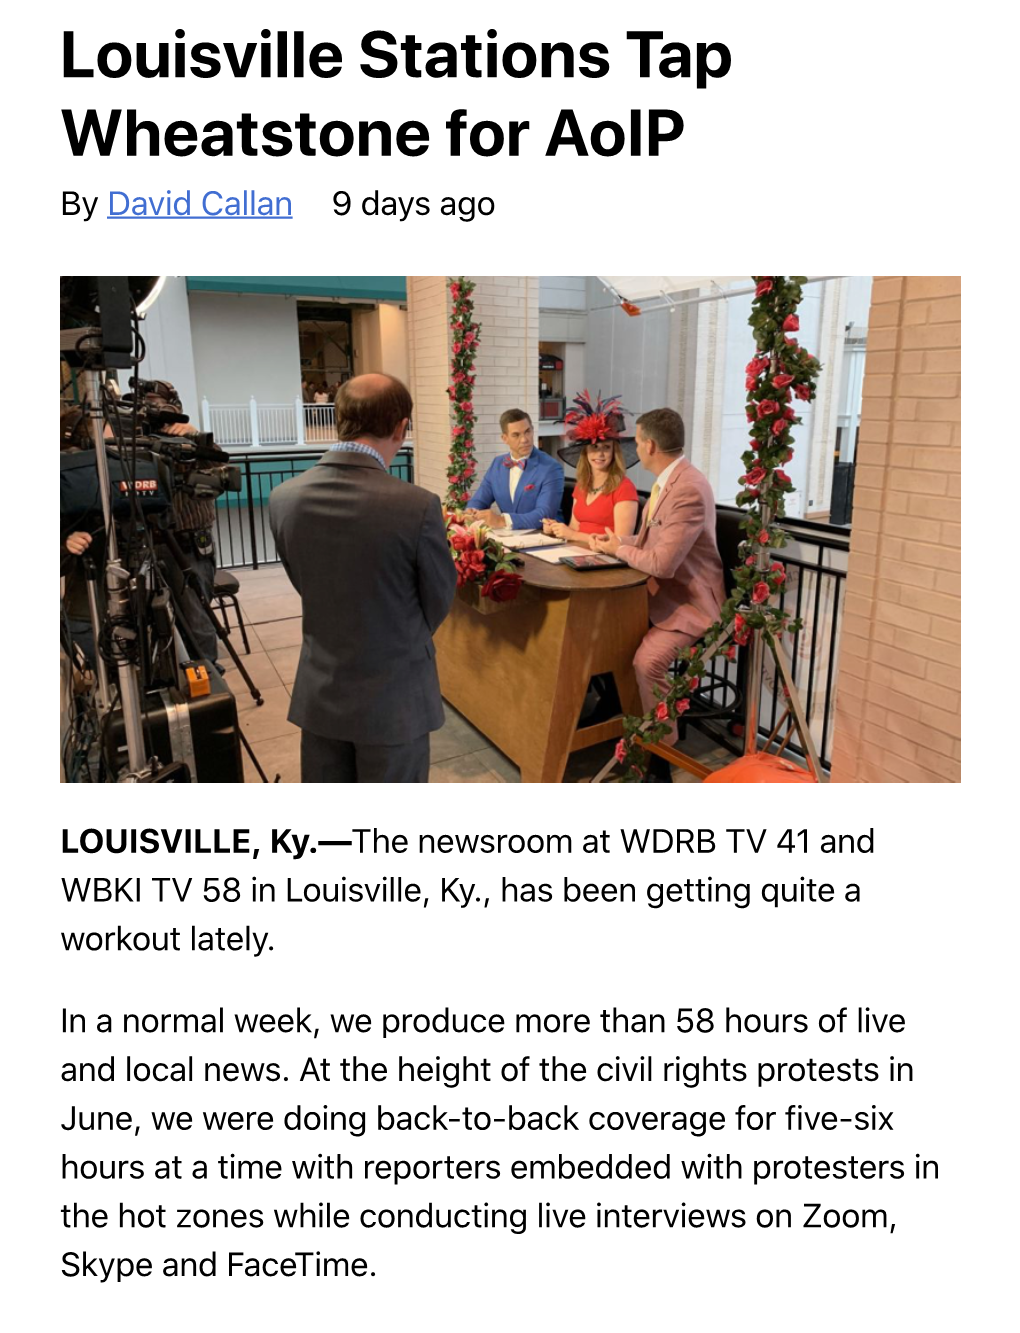 Louisville Stations Tap Wheatstone for Aoip by David Callan 9 Days Ago